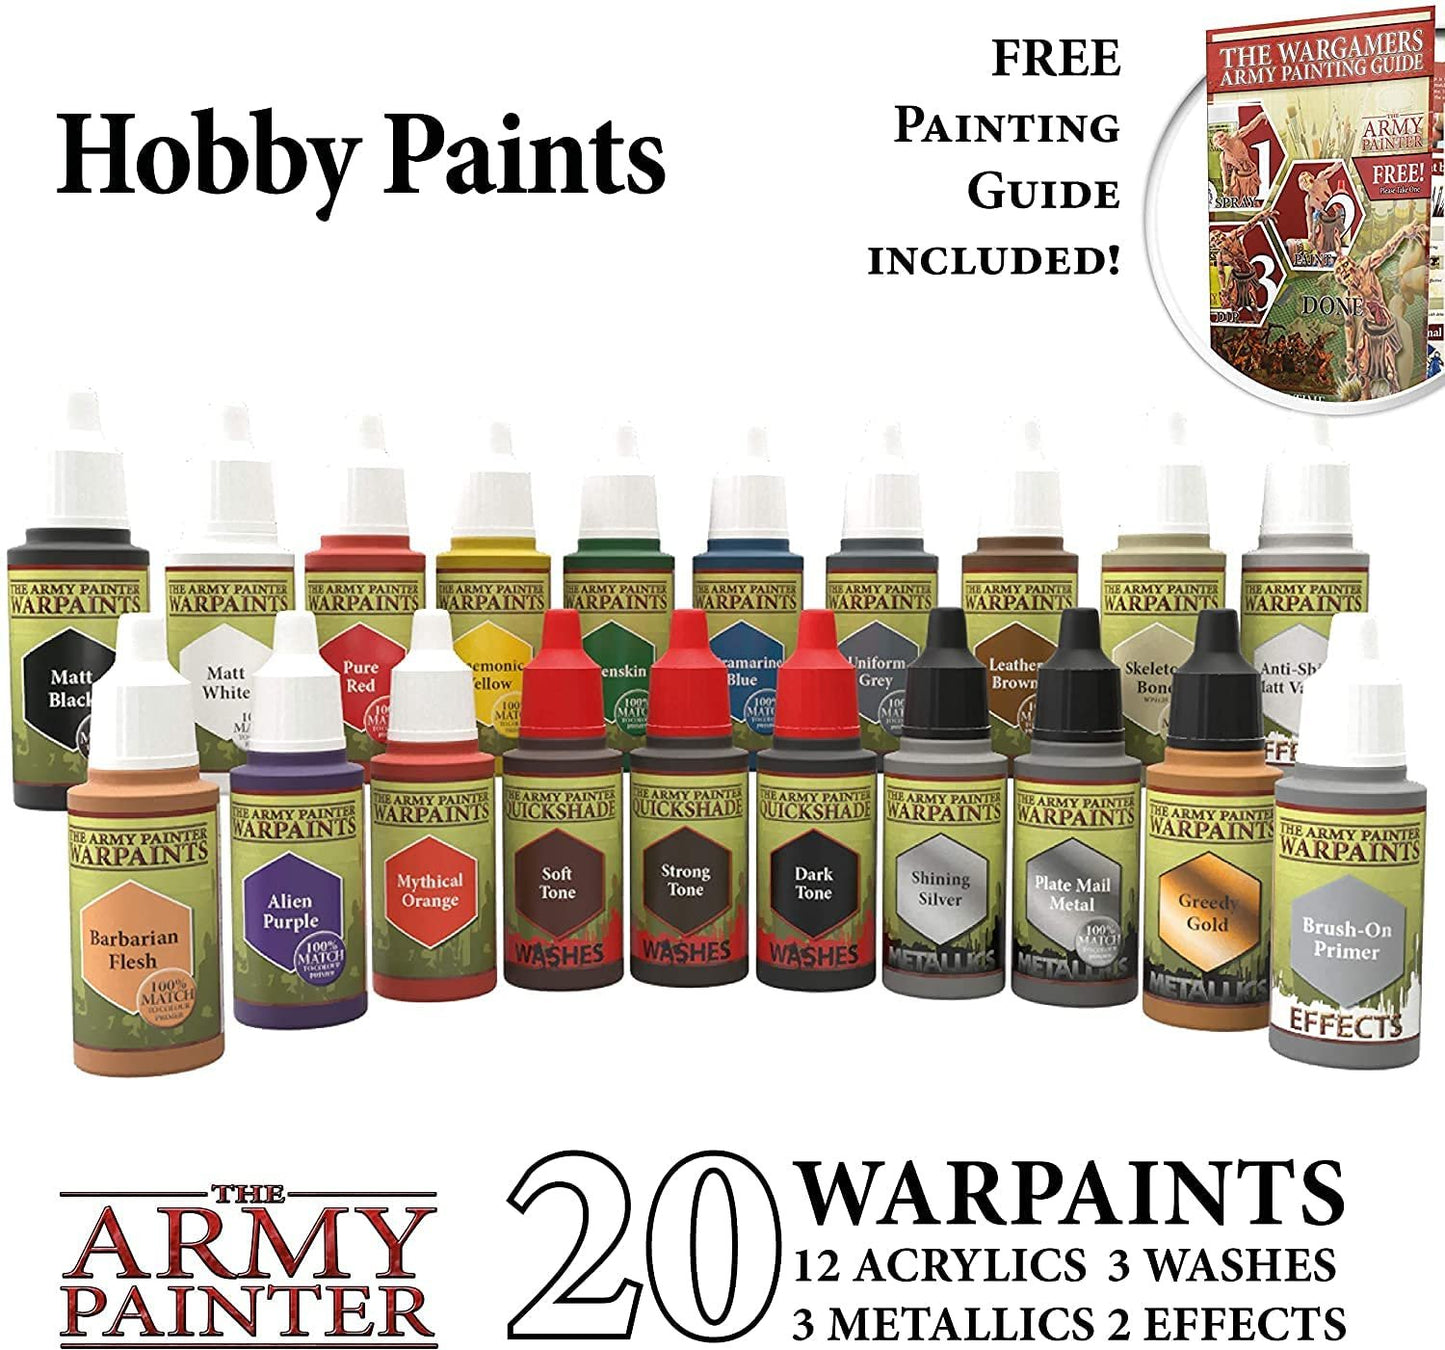 The Army Painter - Super Hobby Collection